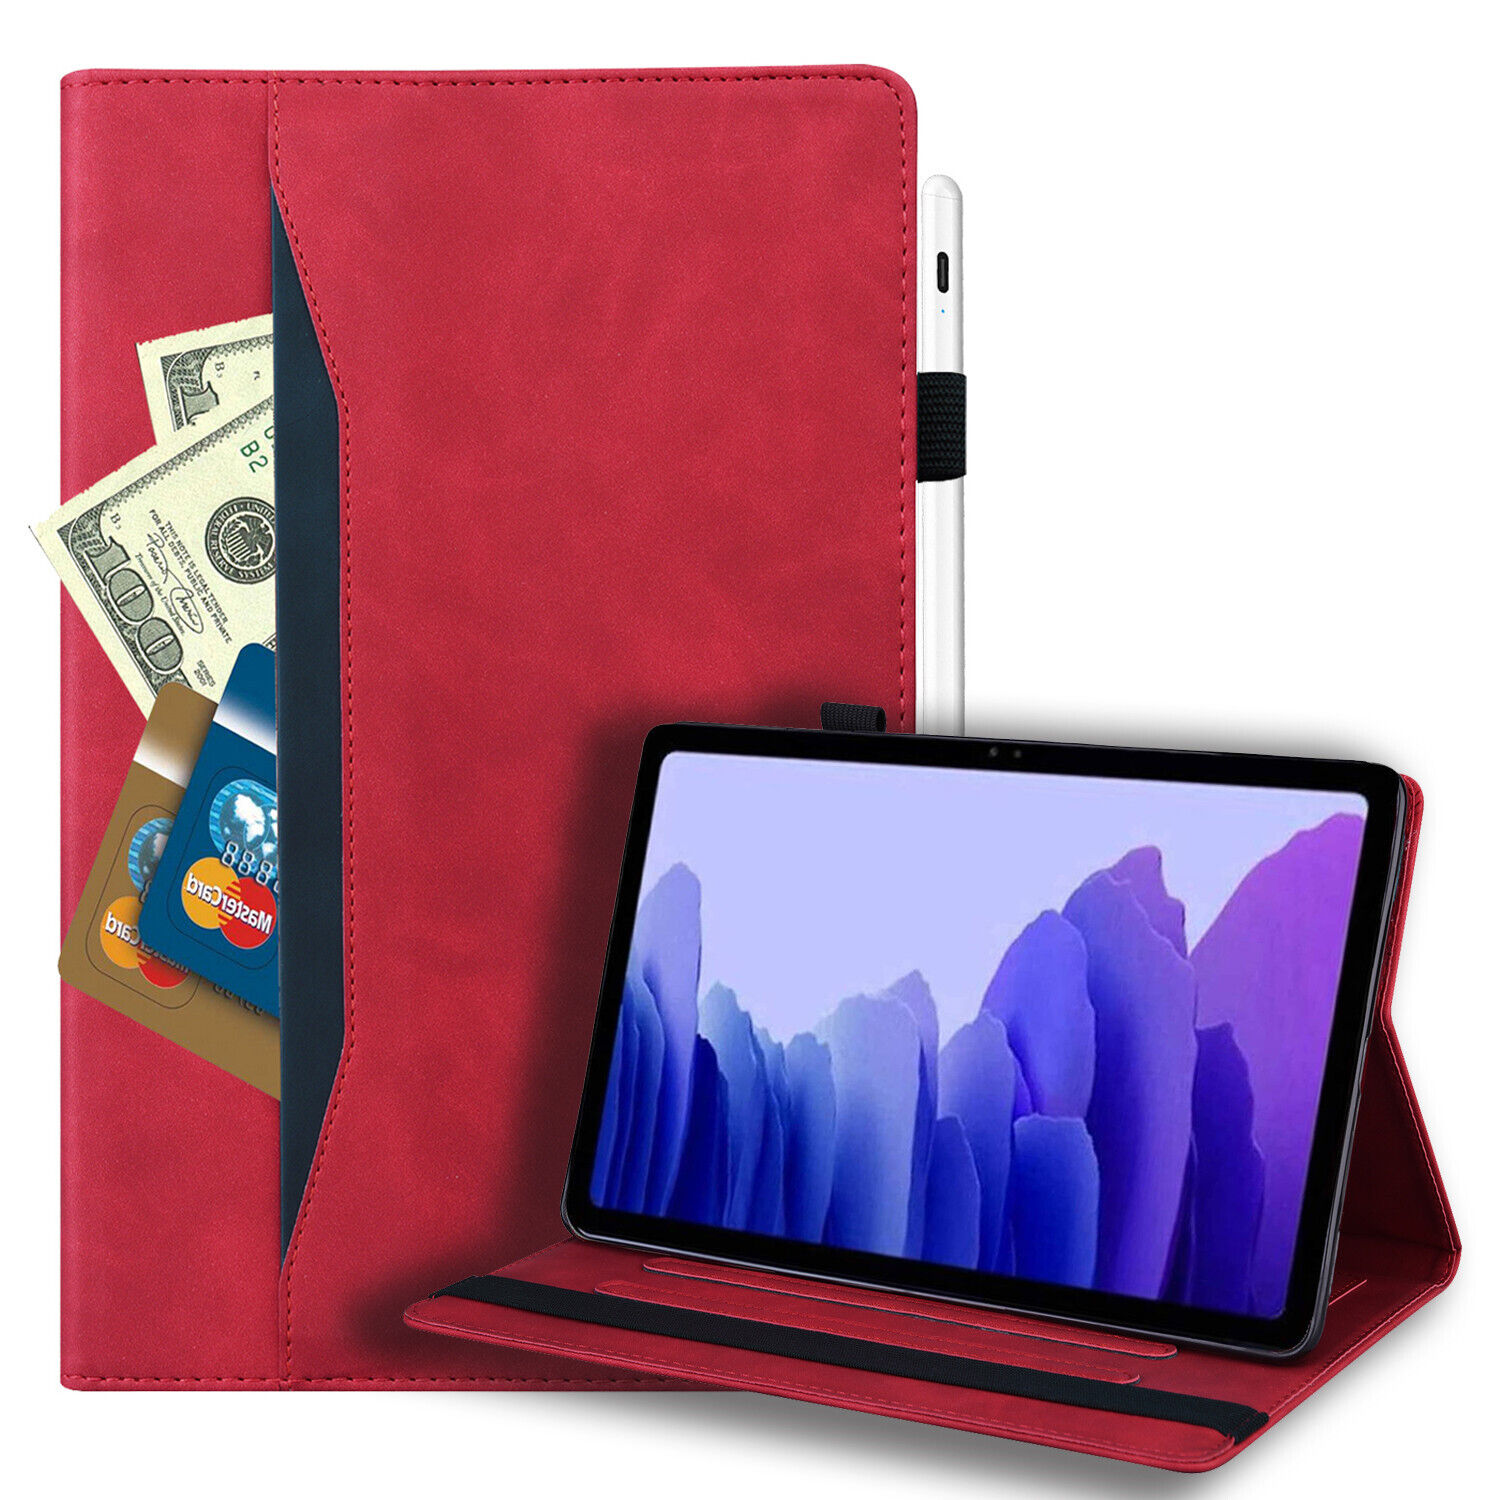 Smart Sleep/Wake Leather Wallet Stand Case For iPad 9.7 5/6th Gen Mini 654321Air